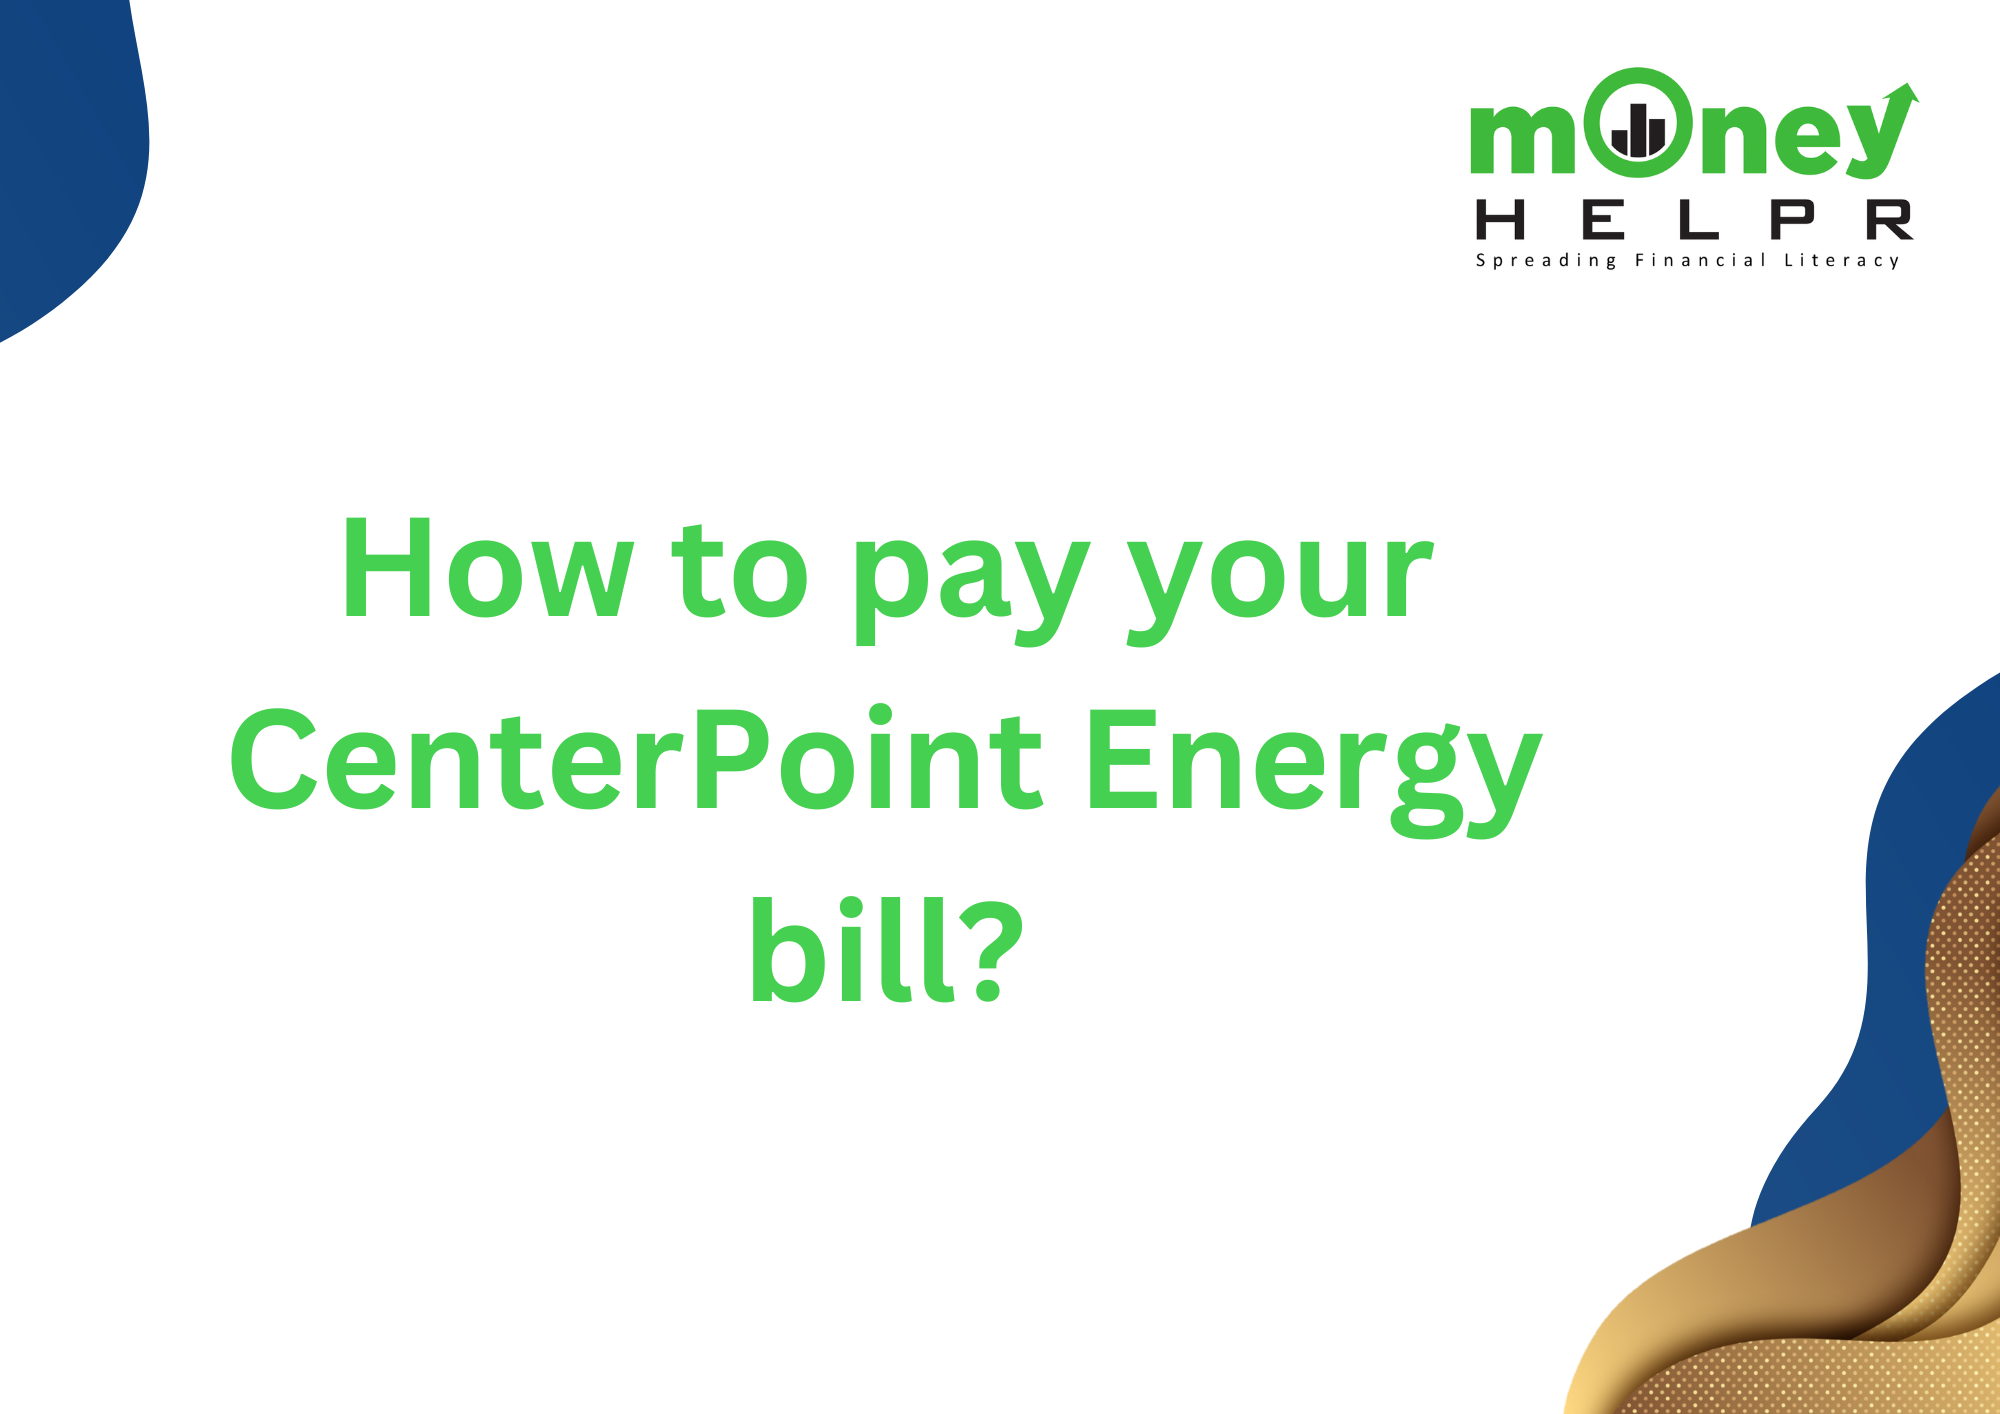 How to pay your CenterPoint Energy bill?